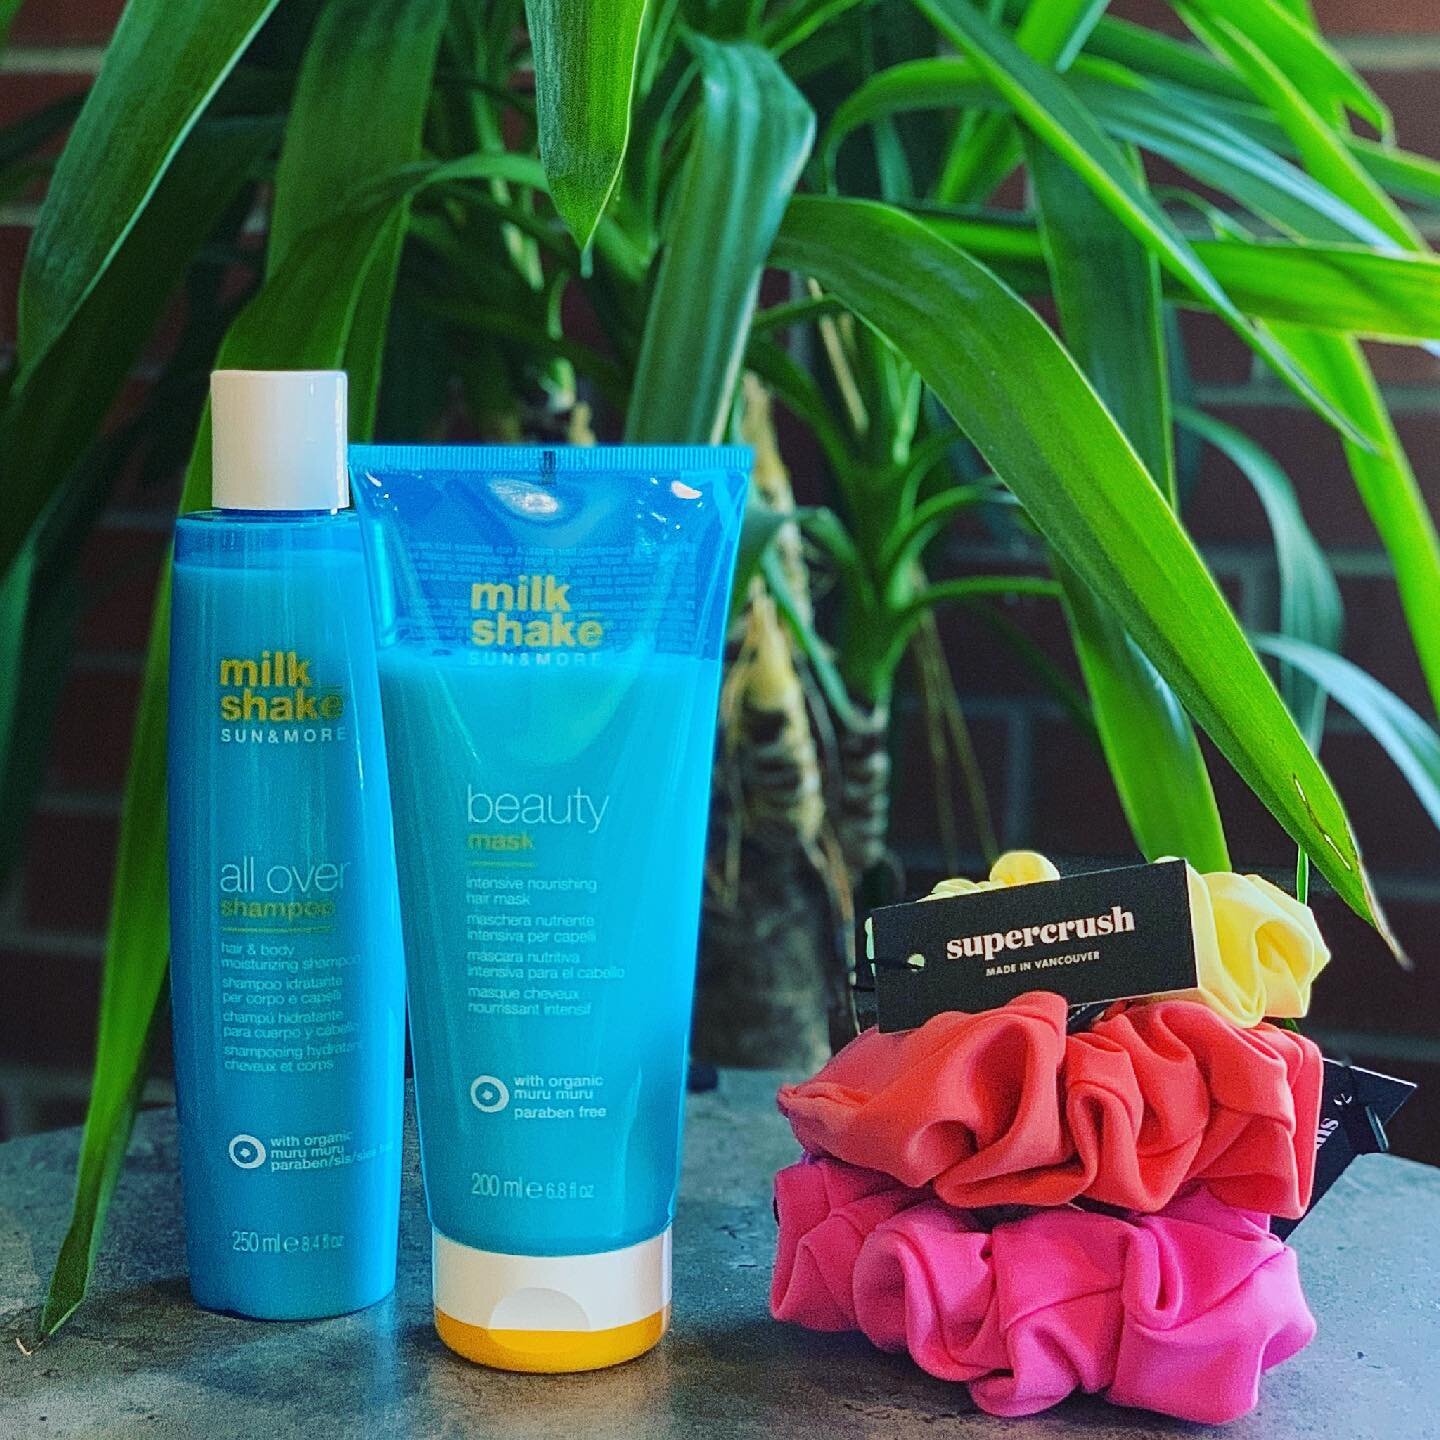 Help your hair beat the heat with an amazing bundle from two of our favourite brands. @milkshakehairofficial swim shampoo and hair mask will leave your beach or pool hair soft and manageable. Pair it with a locally made @supercrush swim scrunchie for